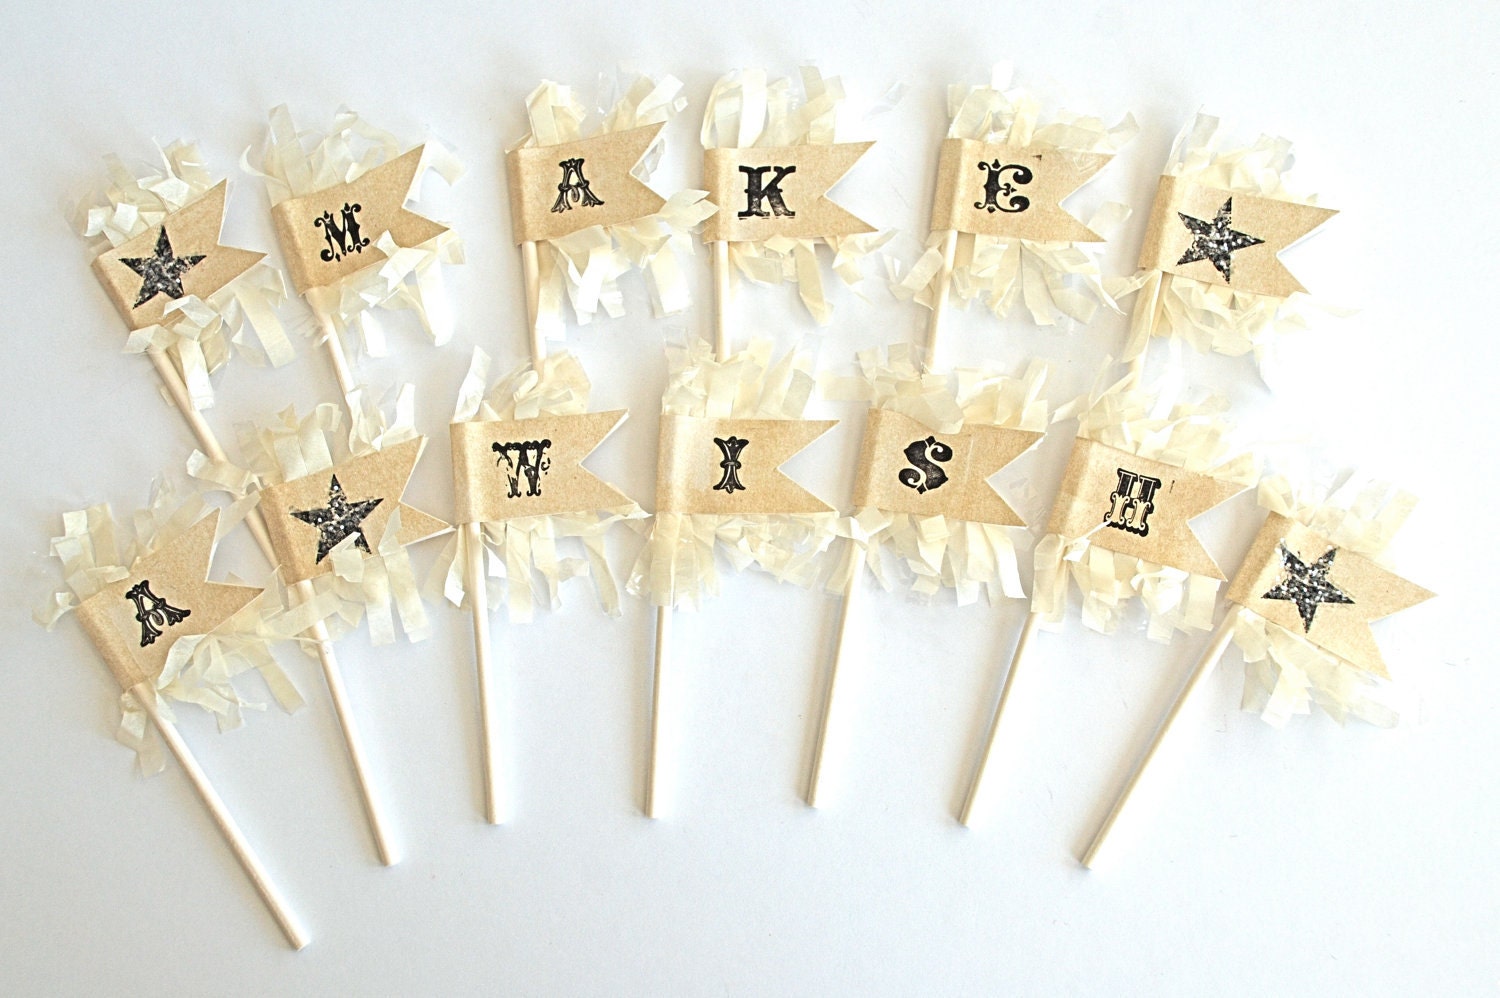 Make A Wish - Cupcake Toppers/Party Sticks - Bakers Dozen - AForestFrolic